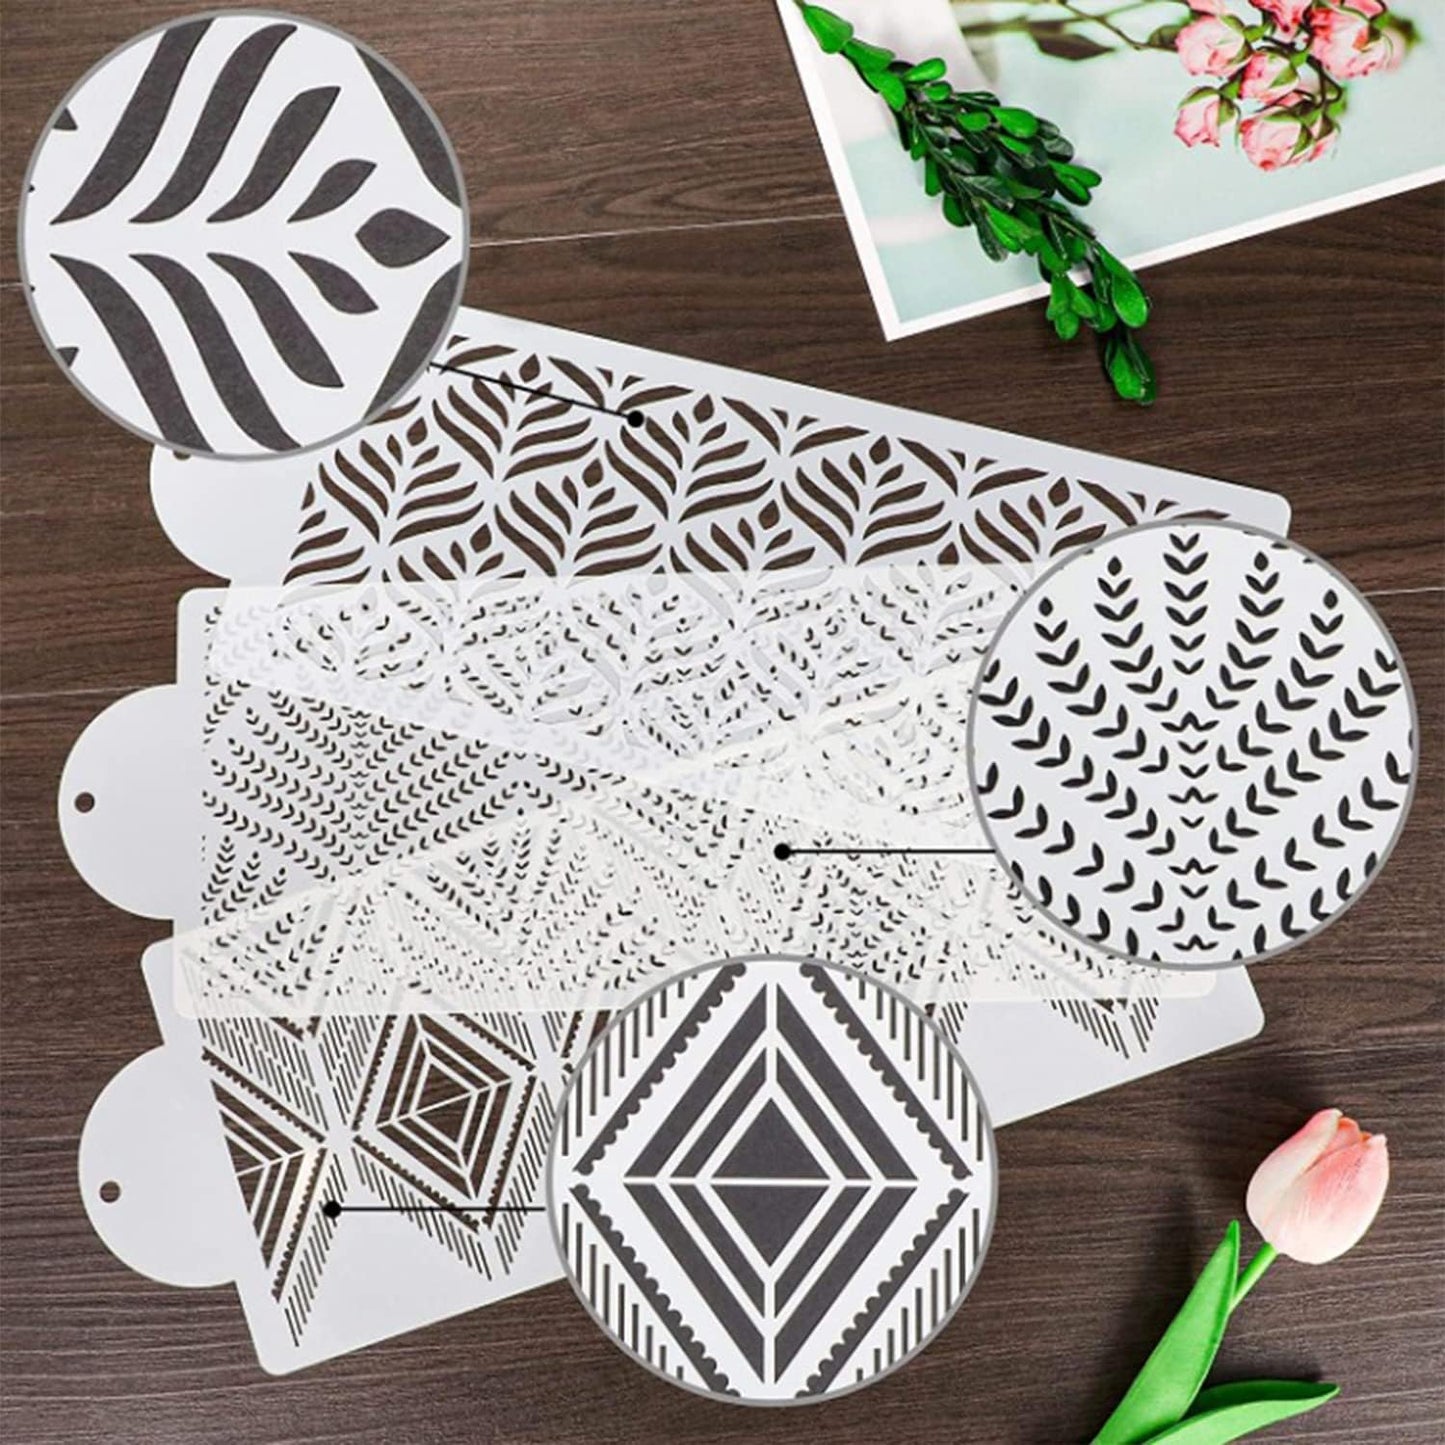 Lace Cake Stencils Design (Pack of 3)